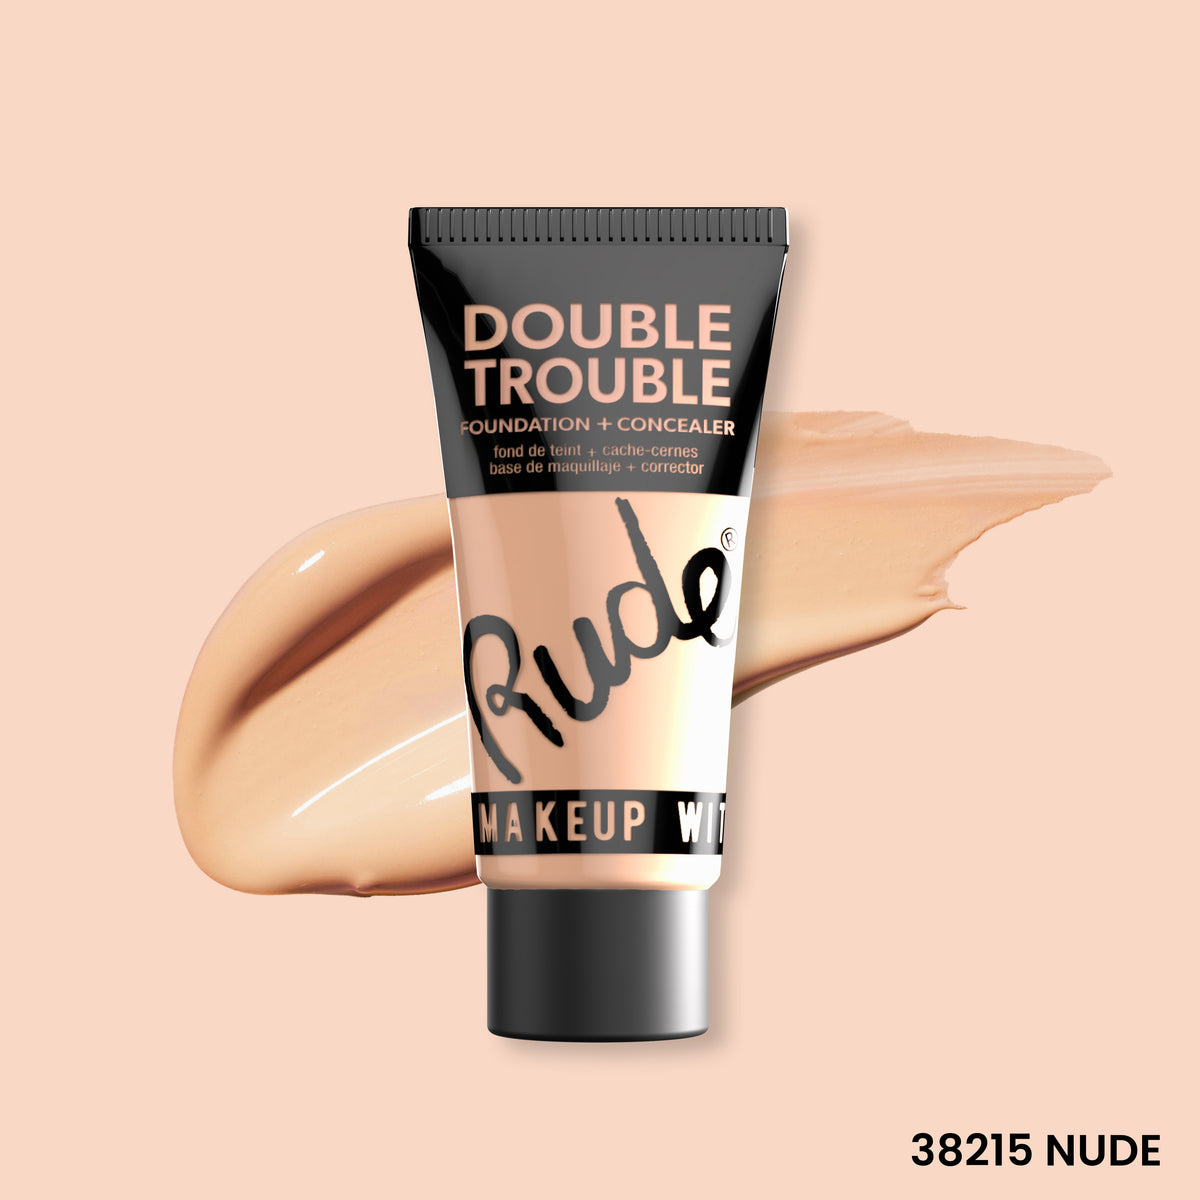 Double Trouble Foundation and Concealer